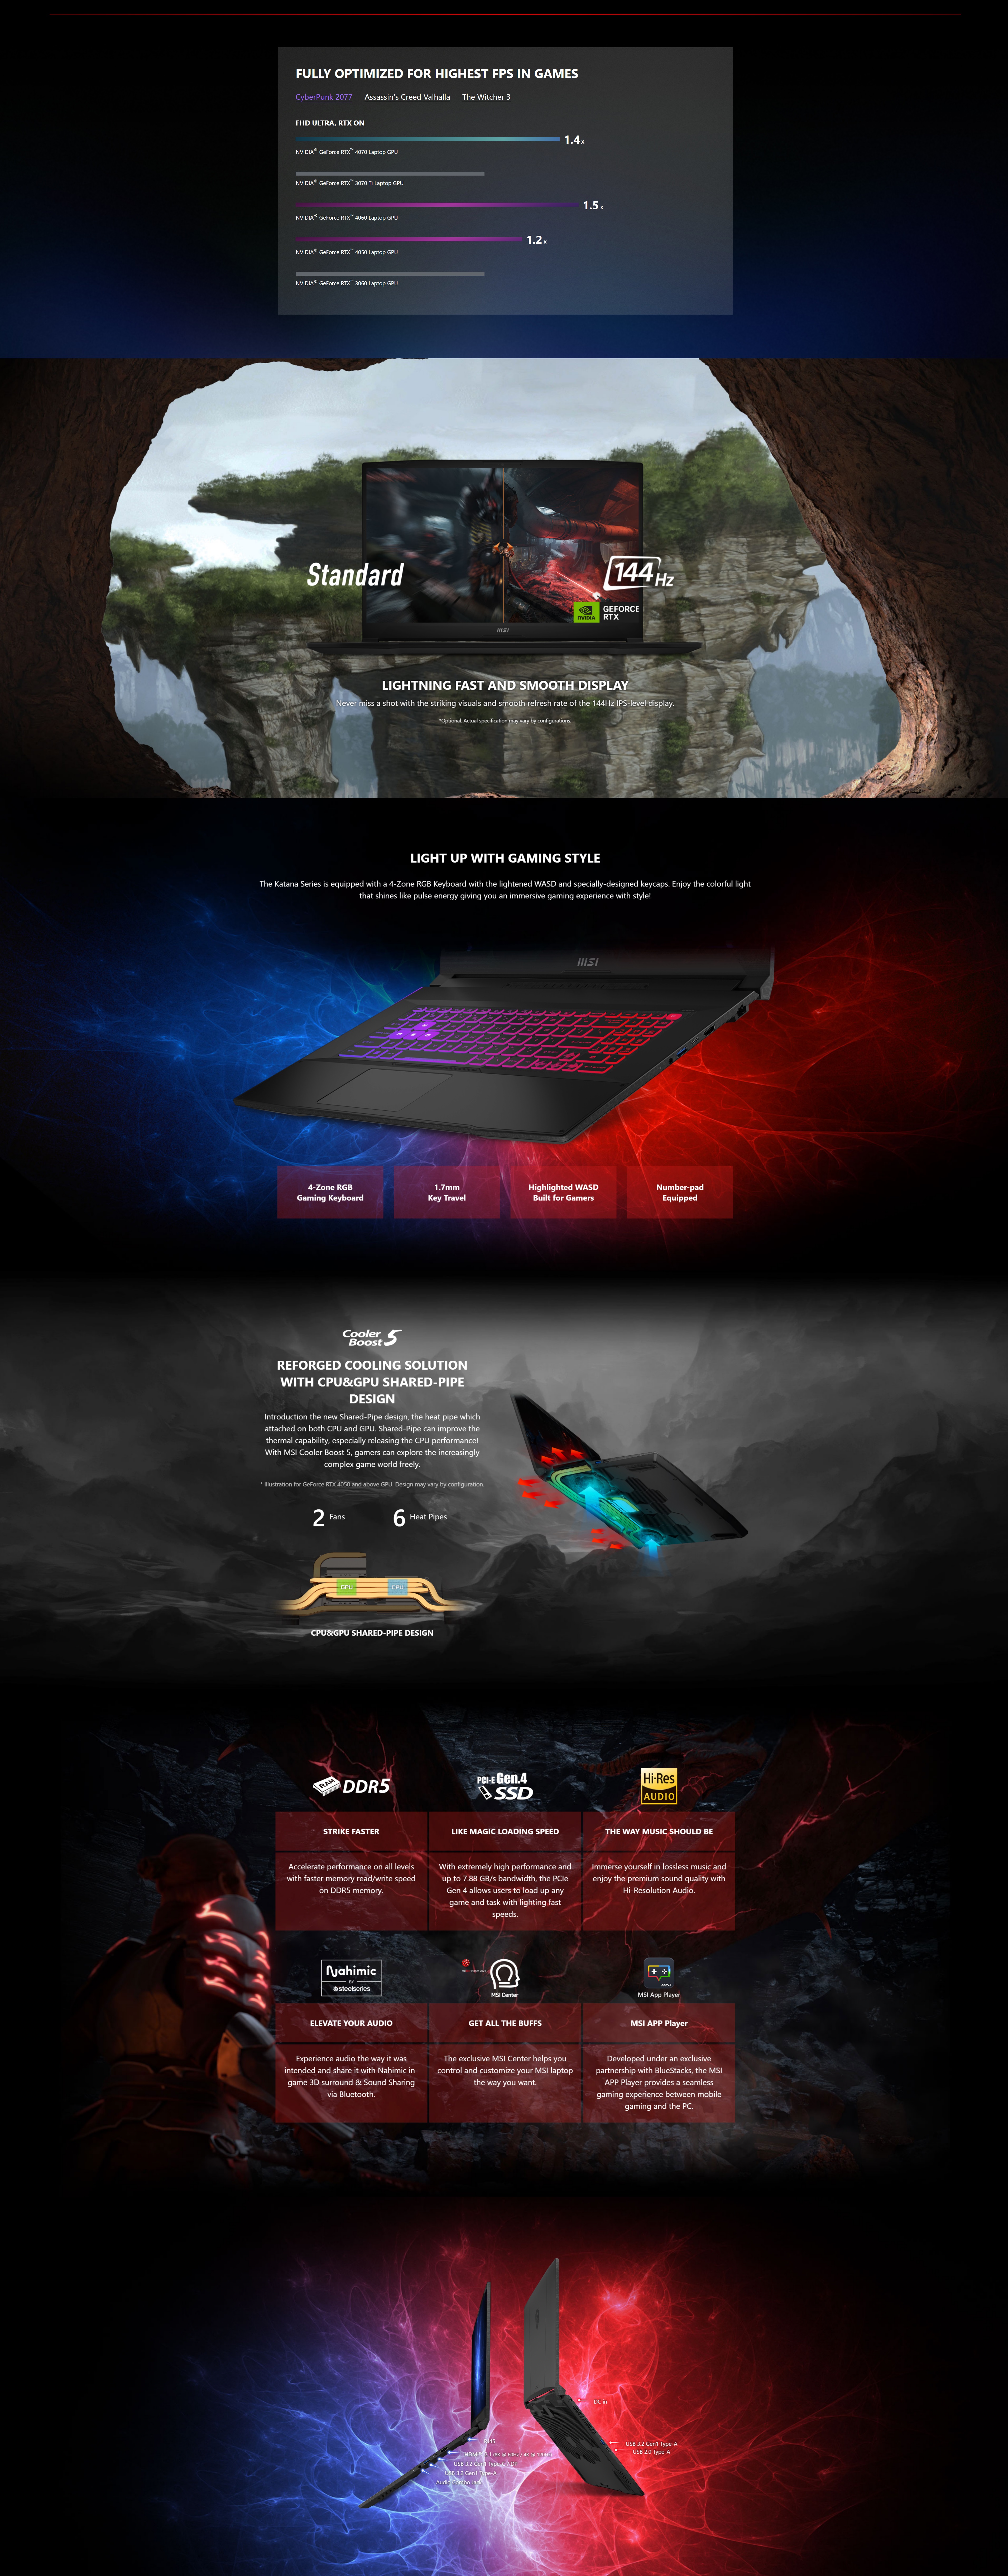 A large marketing image providing additional information about the product MSI Katana 17 B13VEK-1076AU 17.3" 144Hz 13th Gen i7 13620H RTX 4050 Win 11 Pro Gaming Notebook - Additional alt info not provided